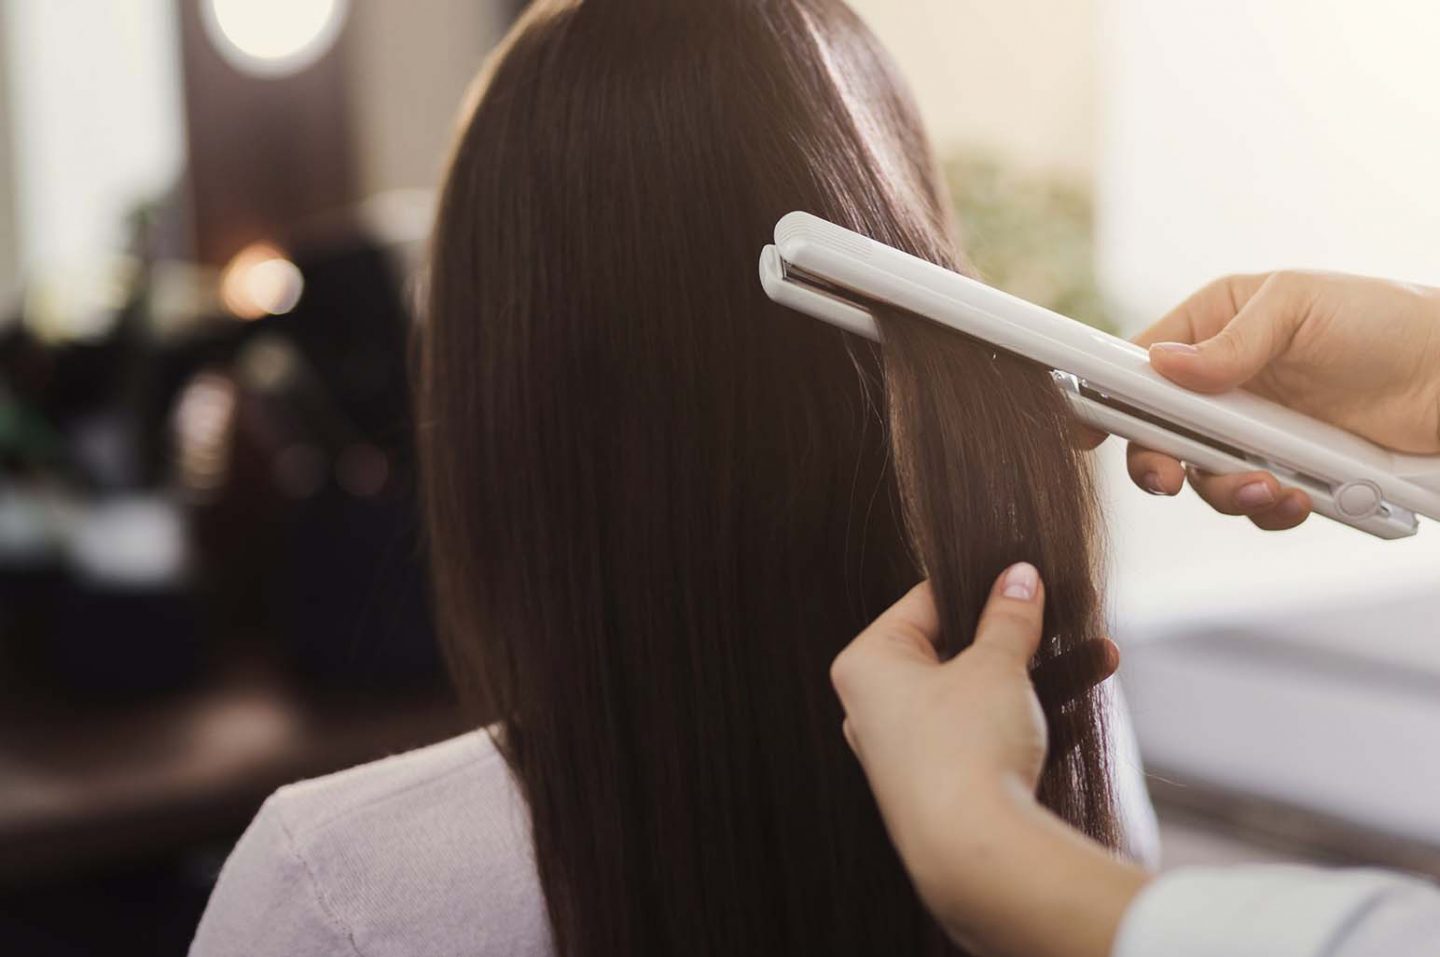 Tips for Buying a Hair Straightener